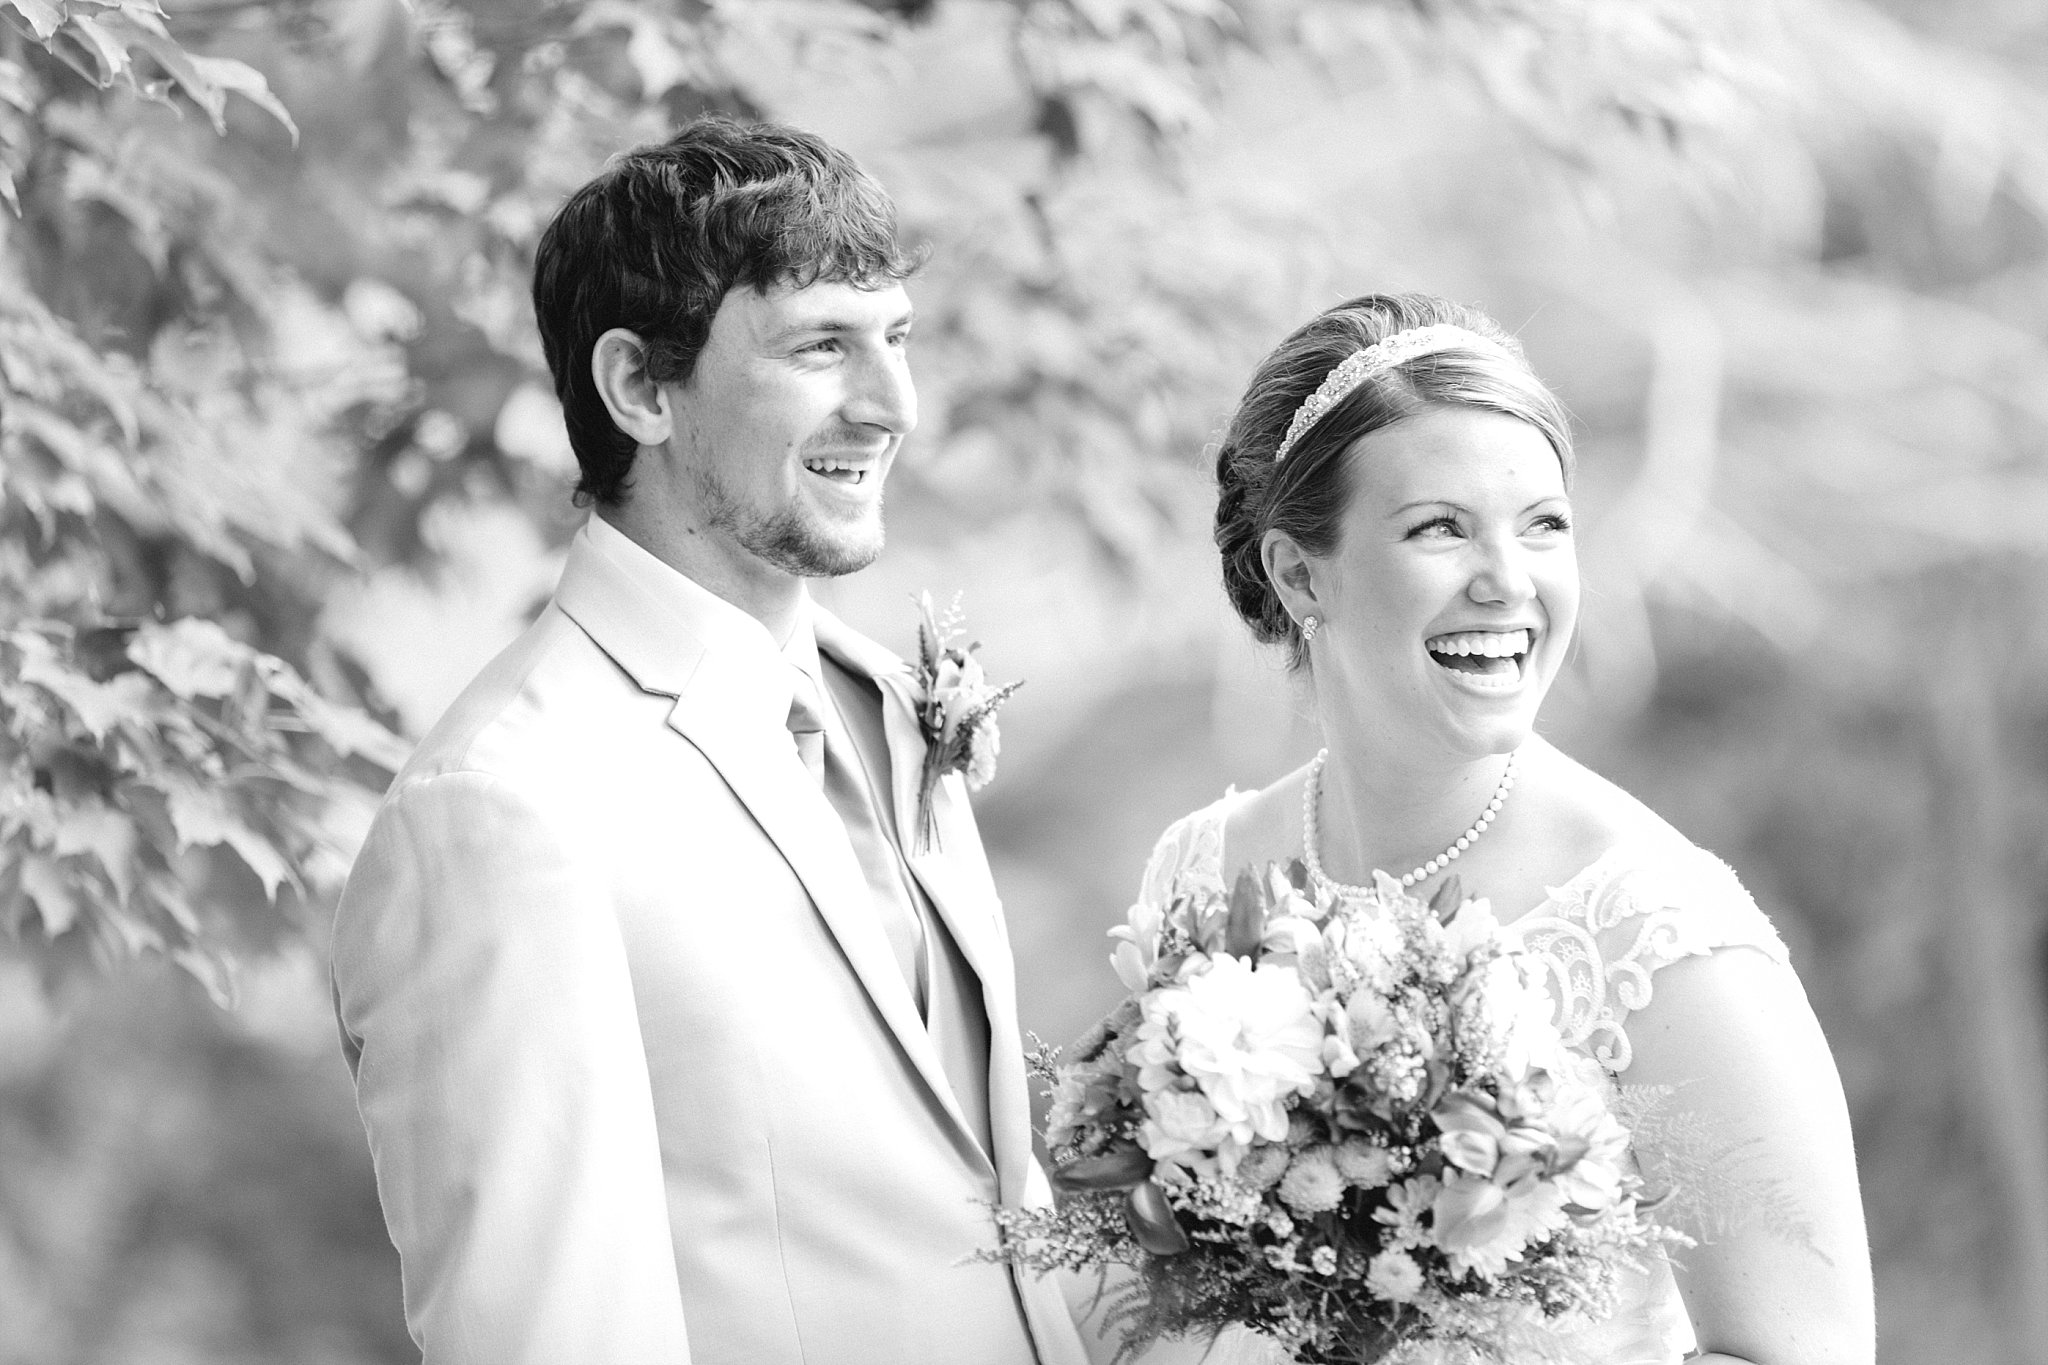 www.james-stokes.com | James Stokes Photography, LLC - Black and white wedding photo of bride and groom